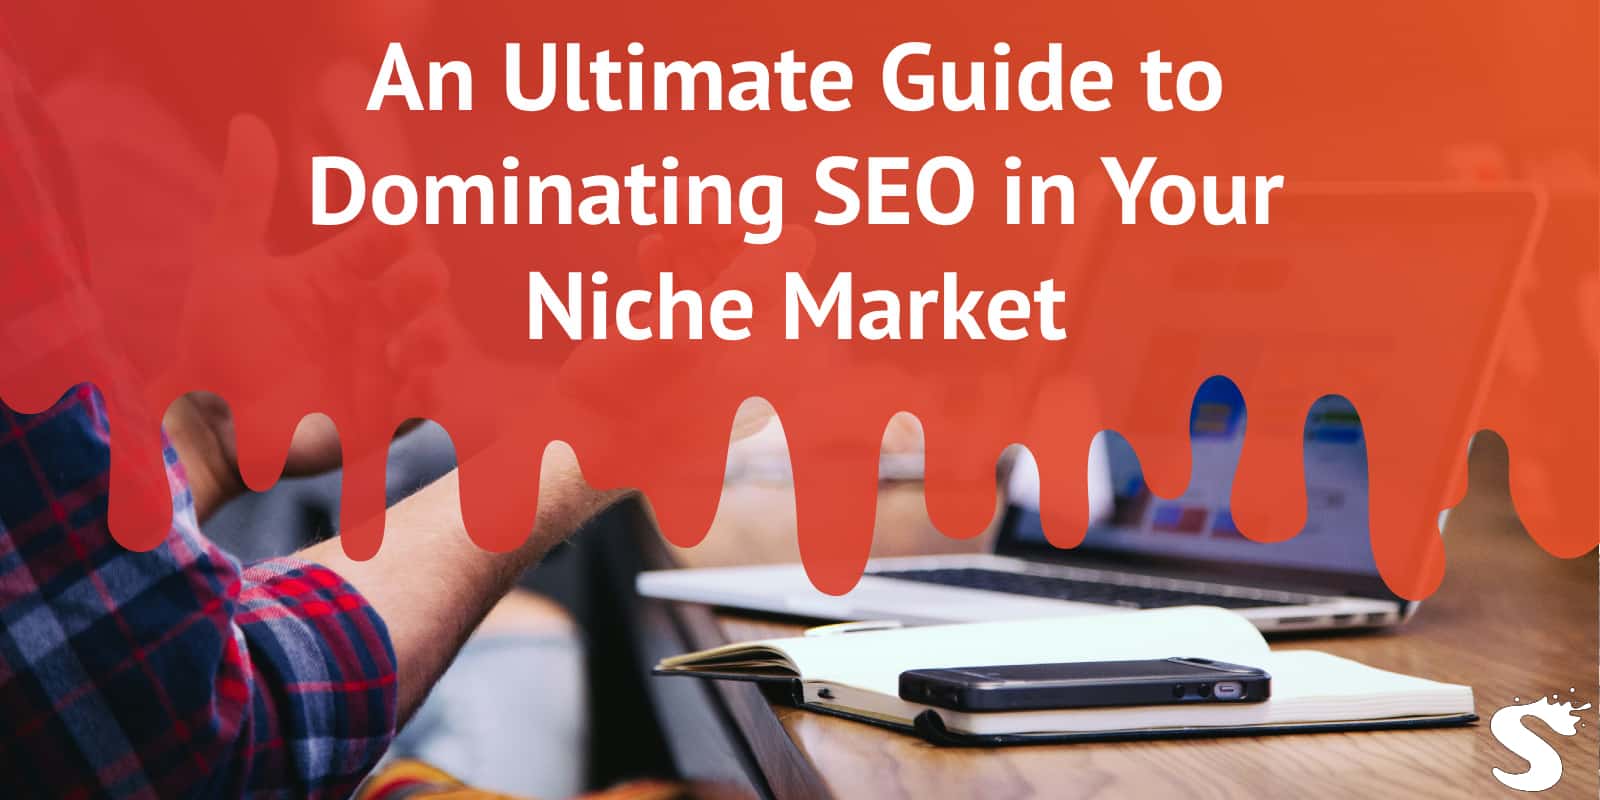 An Ultimate Guide to Dominating SEO in Your Niche Market